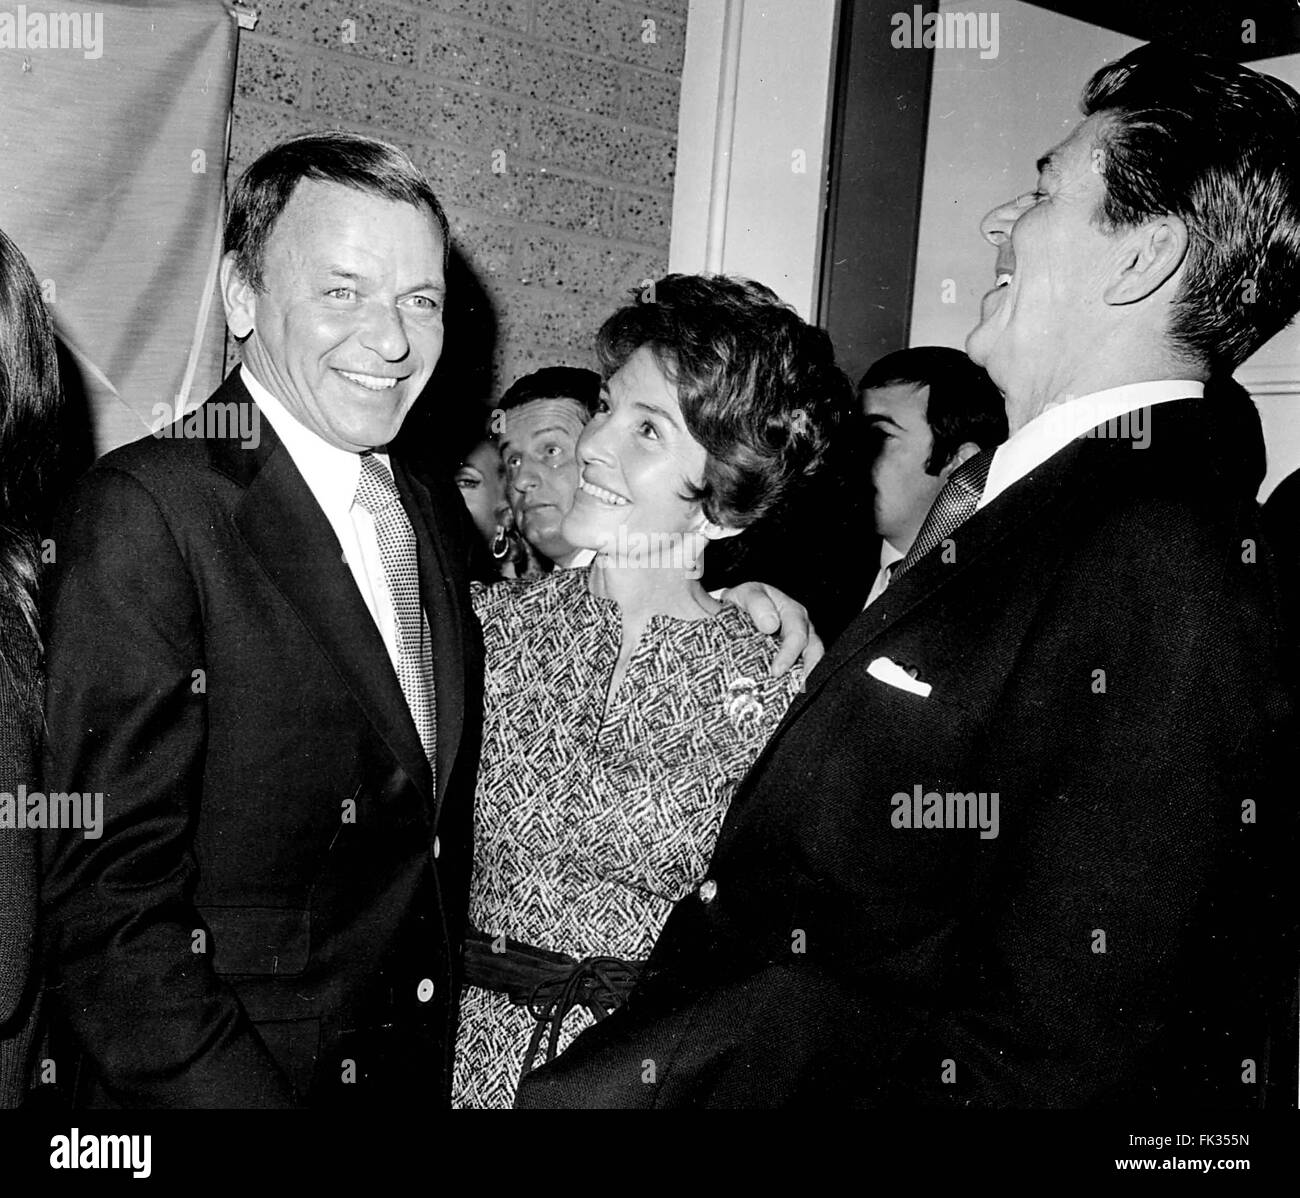 March 6, 2016 - NANCY REAGAN, Ronald Reagan's widow and First Lady from 1981-1989, has died at 94. The cause of death was congestive heart failure. Pictured: 1955 - Exact Date Unknown - FRANK SINATRA, RONALD REAGAN and wife NANCY REAGAN. © Globe Photos/ZUMAPRESS.com/Alamy Live News Stock Photo